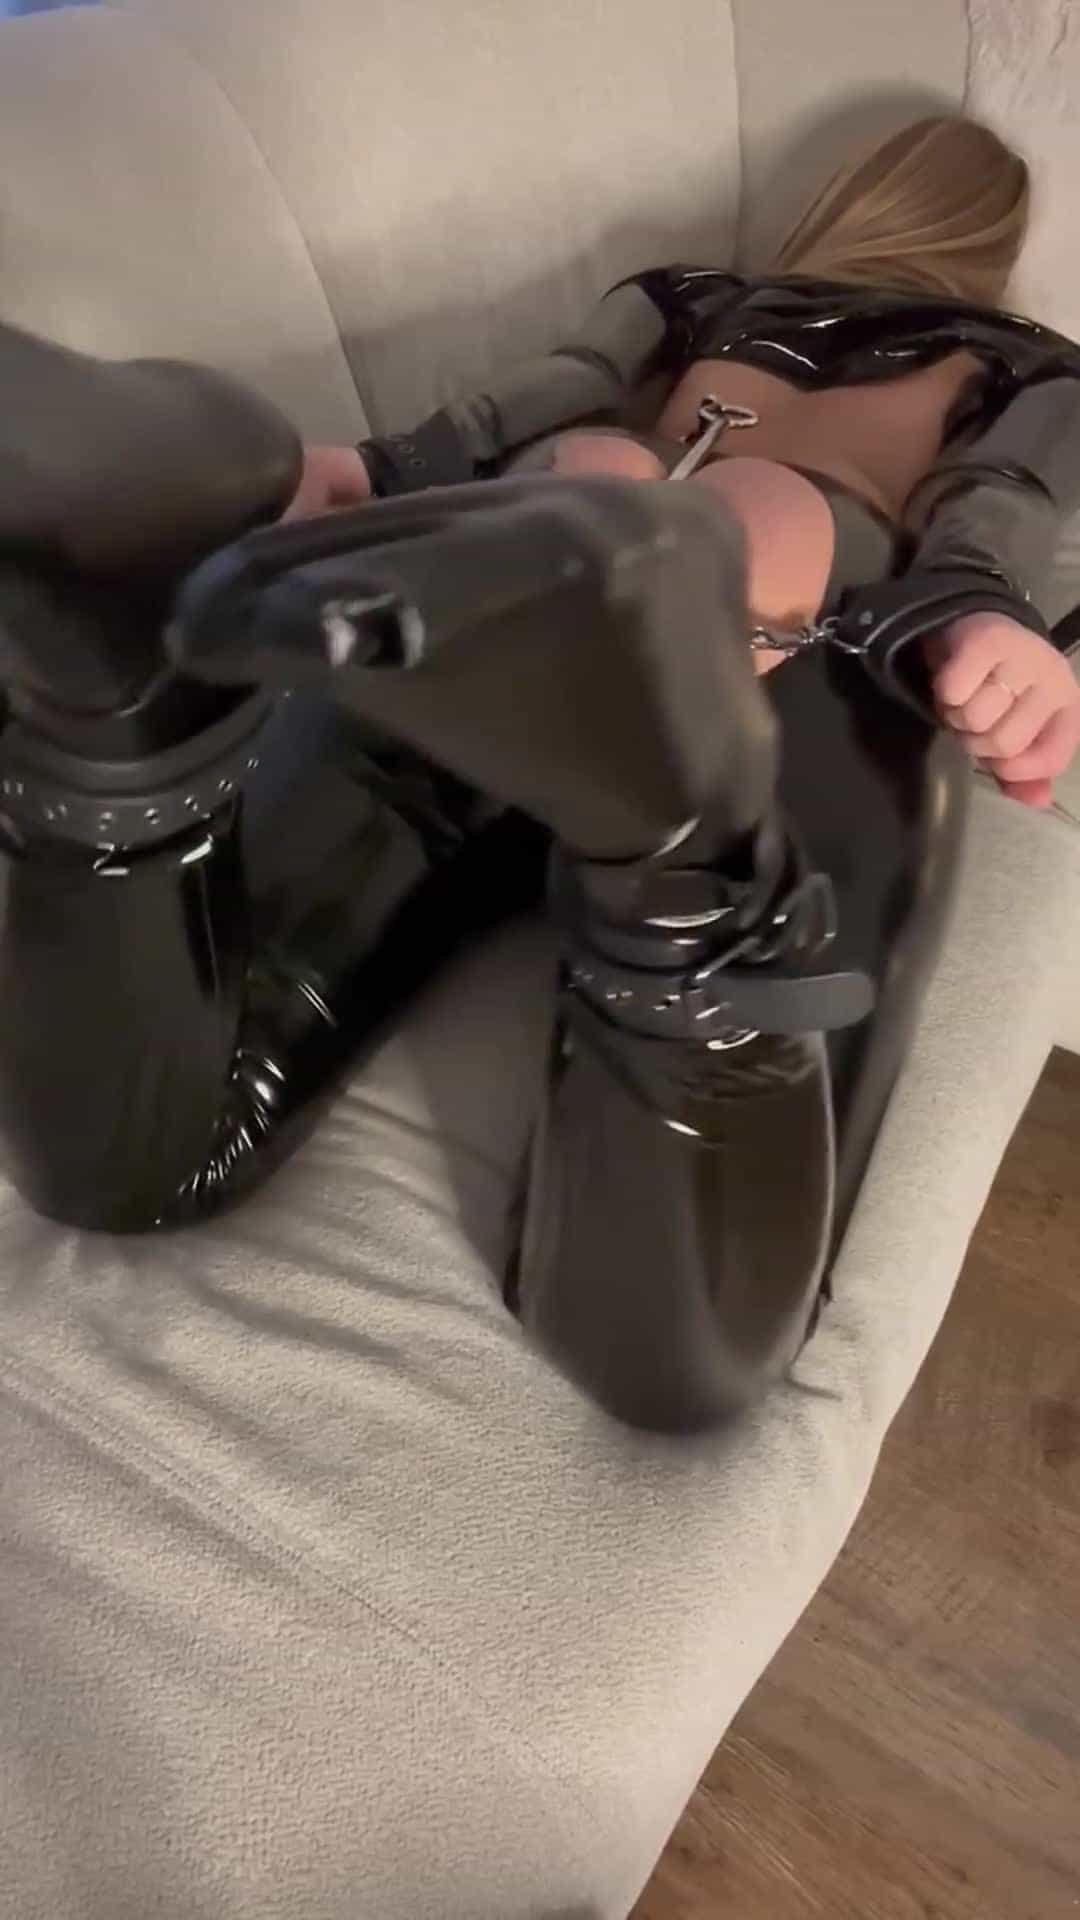 Restrained, shiny outfit &amp; anal hook 😈